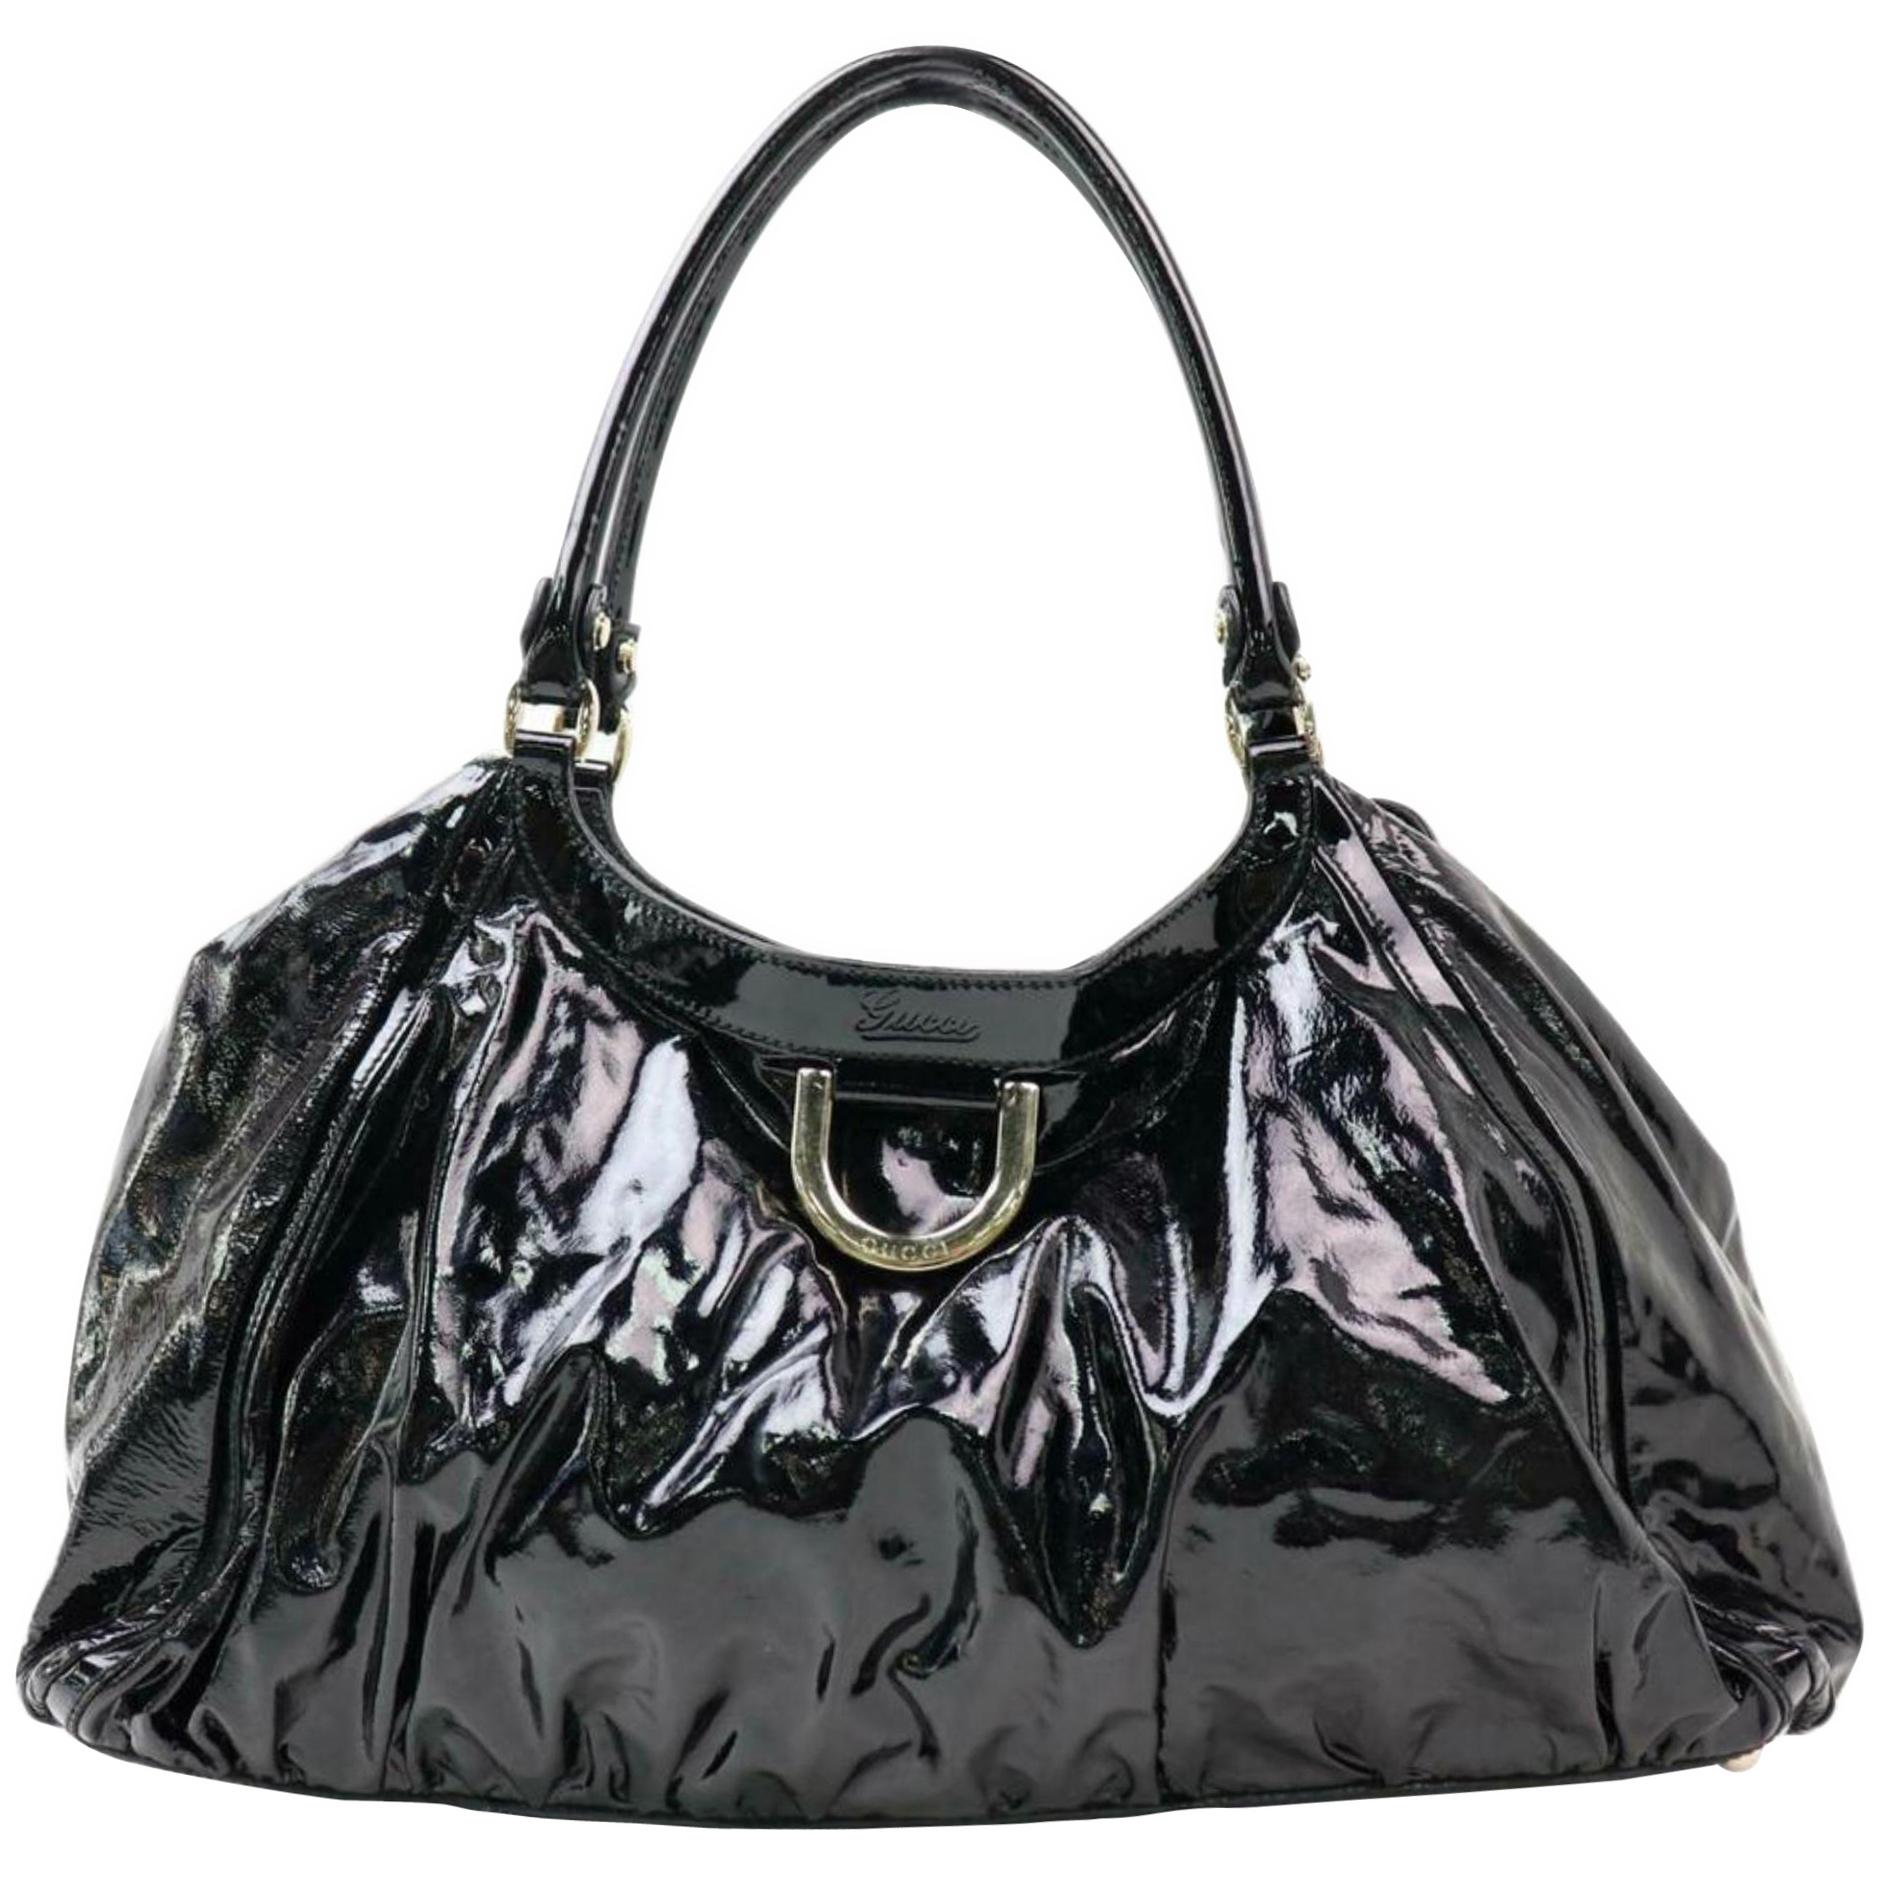 Gucci Abbey D-ring Hobo 870263 Black Patent Leather Satchel For Sale